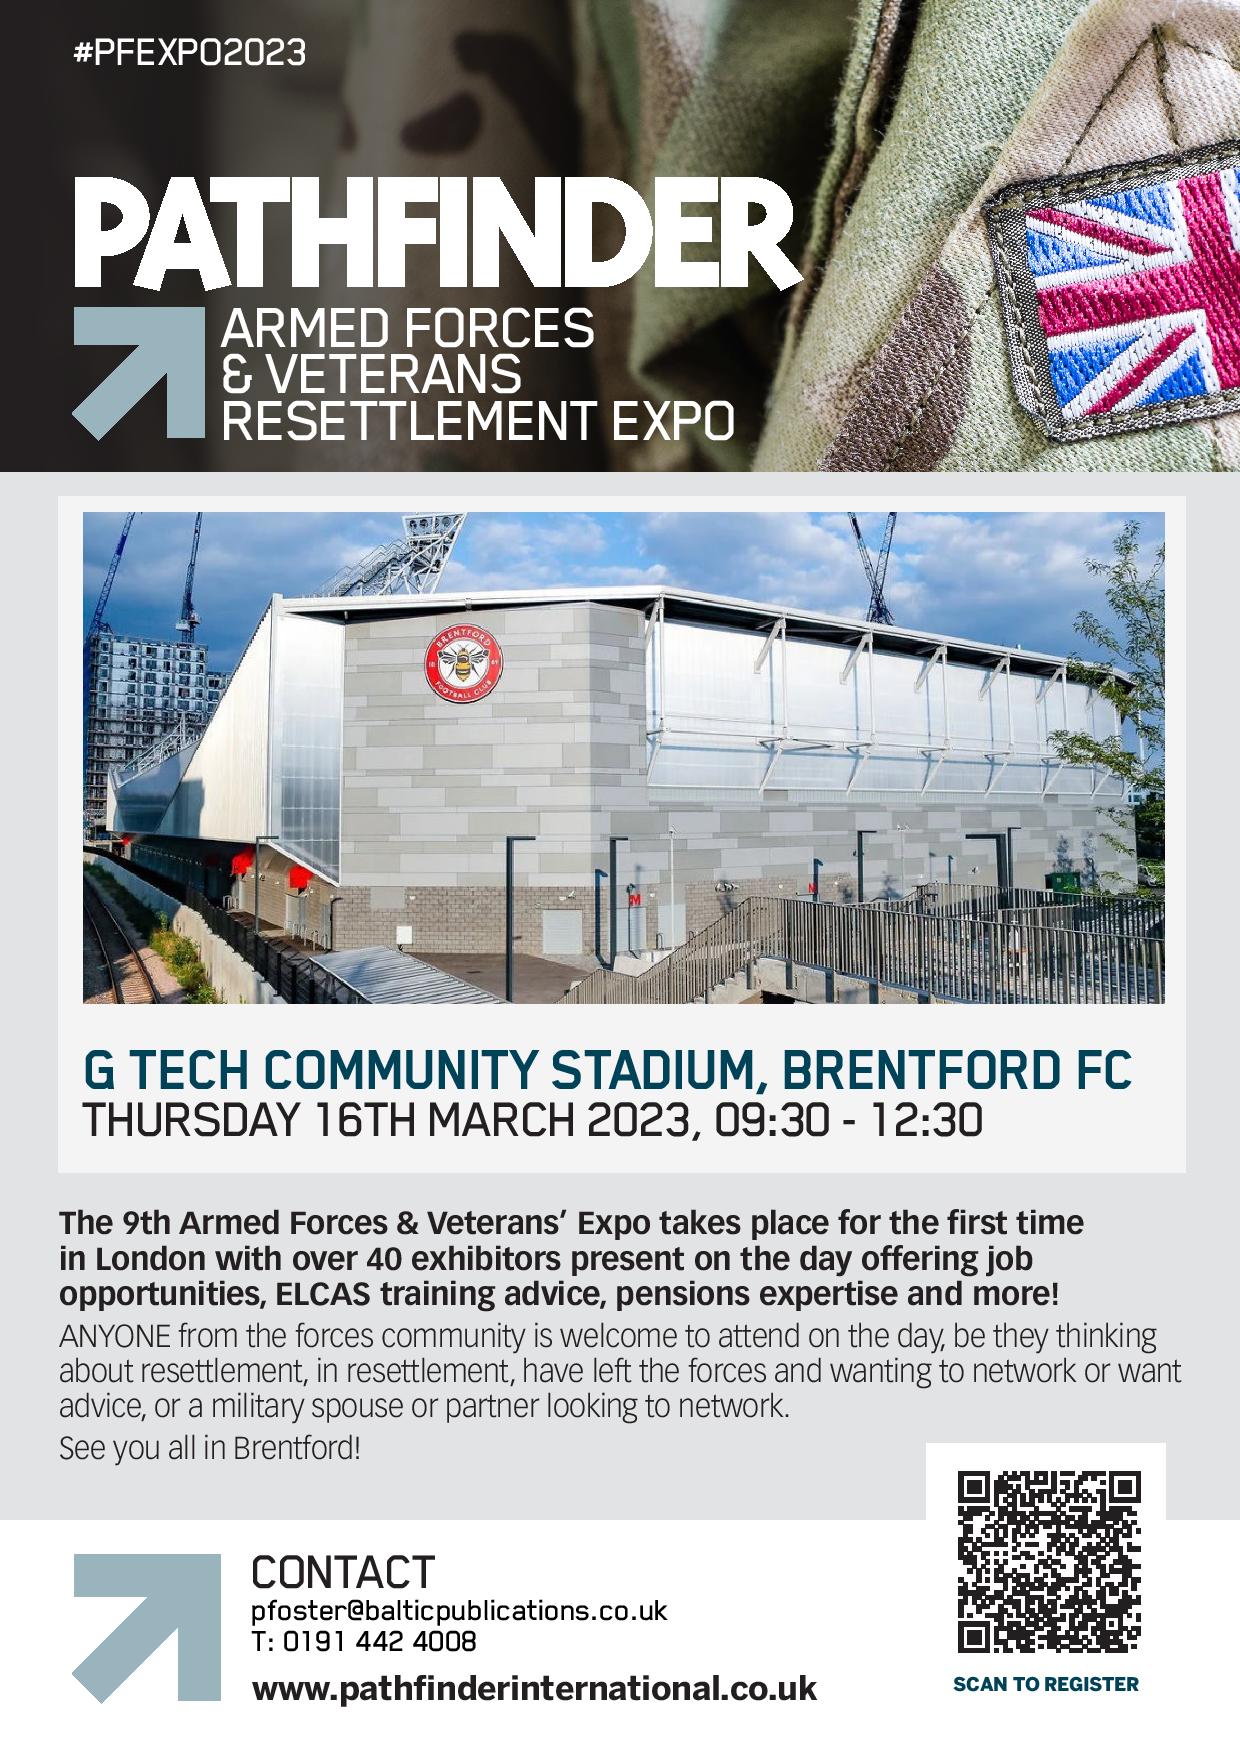 Armed Forces Expo London – 3 Weeks To Go!